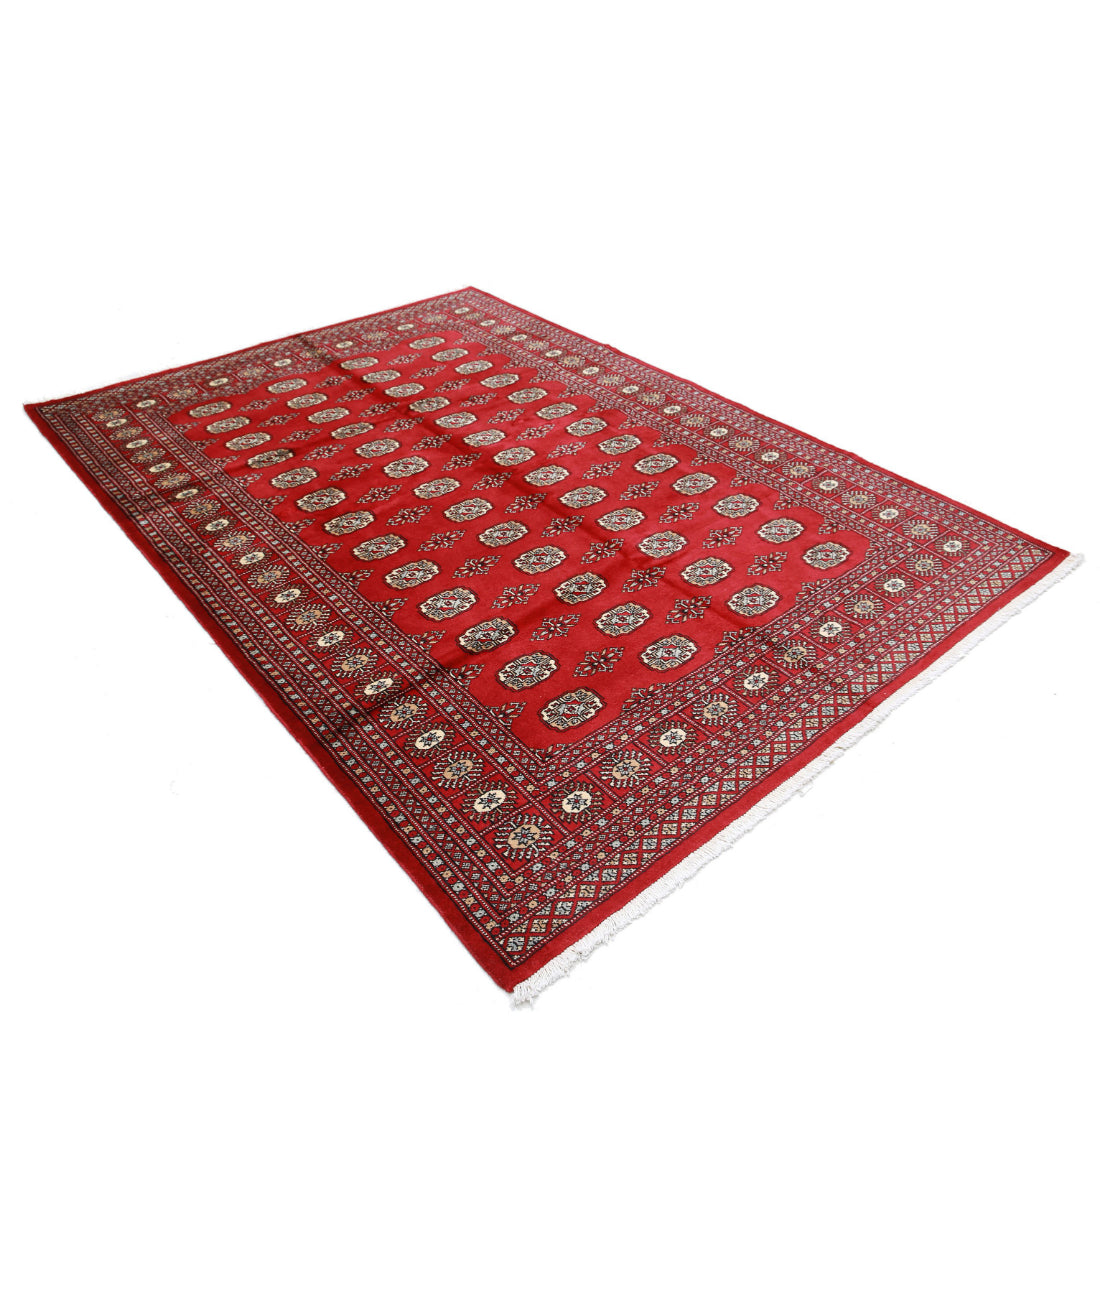 Hand Knotted Tribal Bokhara Wool Rug - 6'2'' x 8'9'' 6'2'' x 8'9'' (185 X 263) / Red / Black